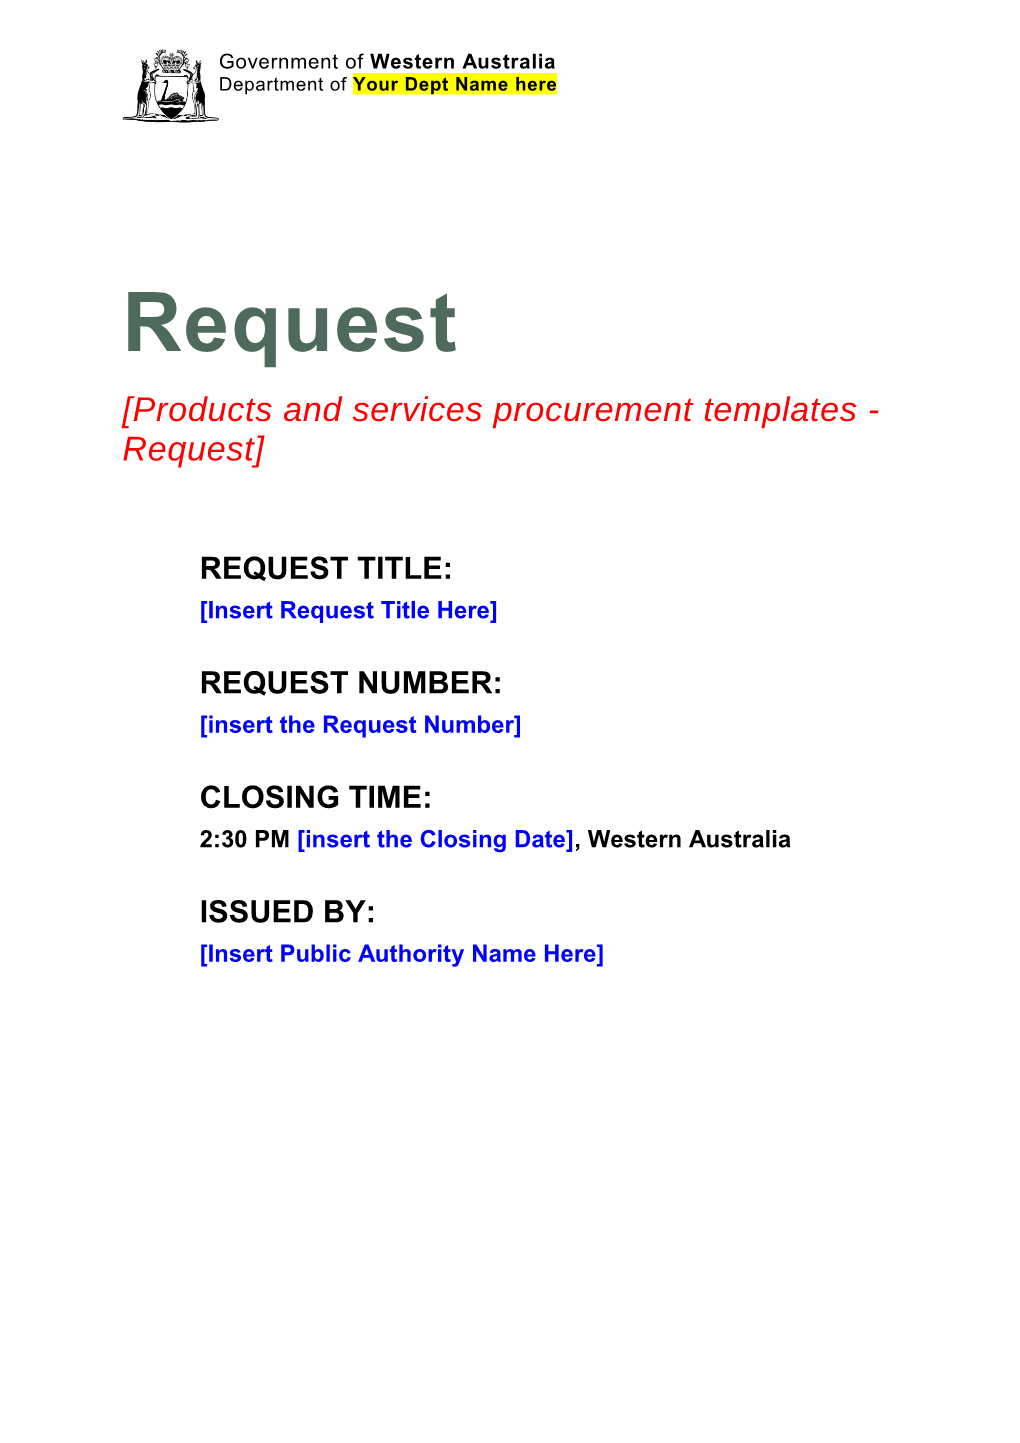 Products and Services Procurement Templates - Request